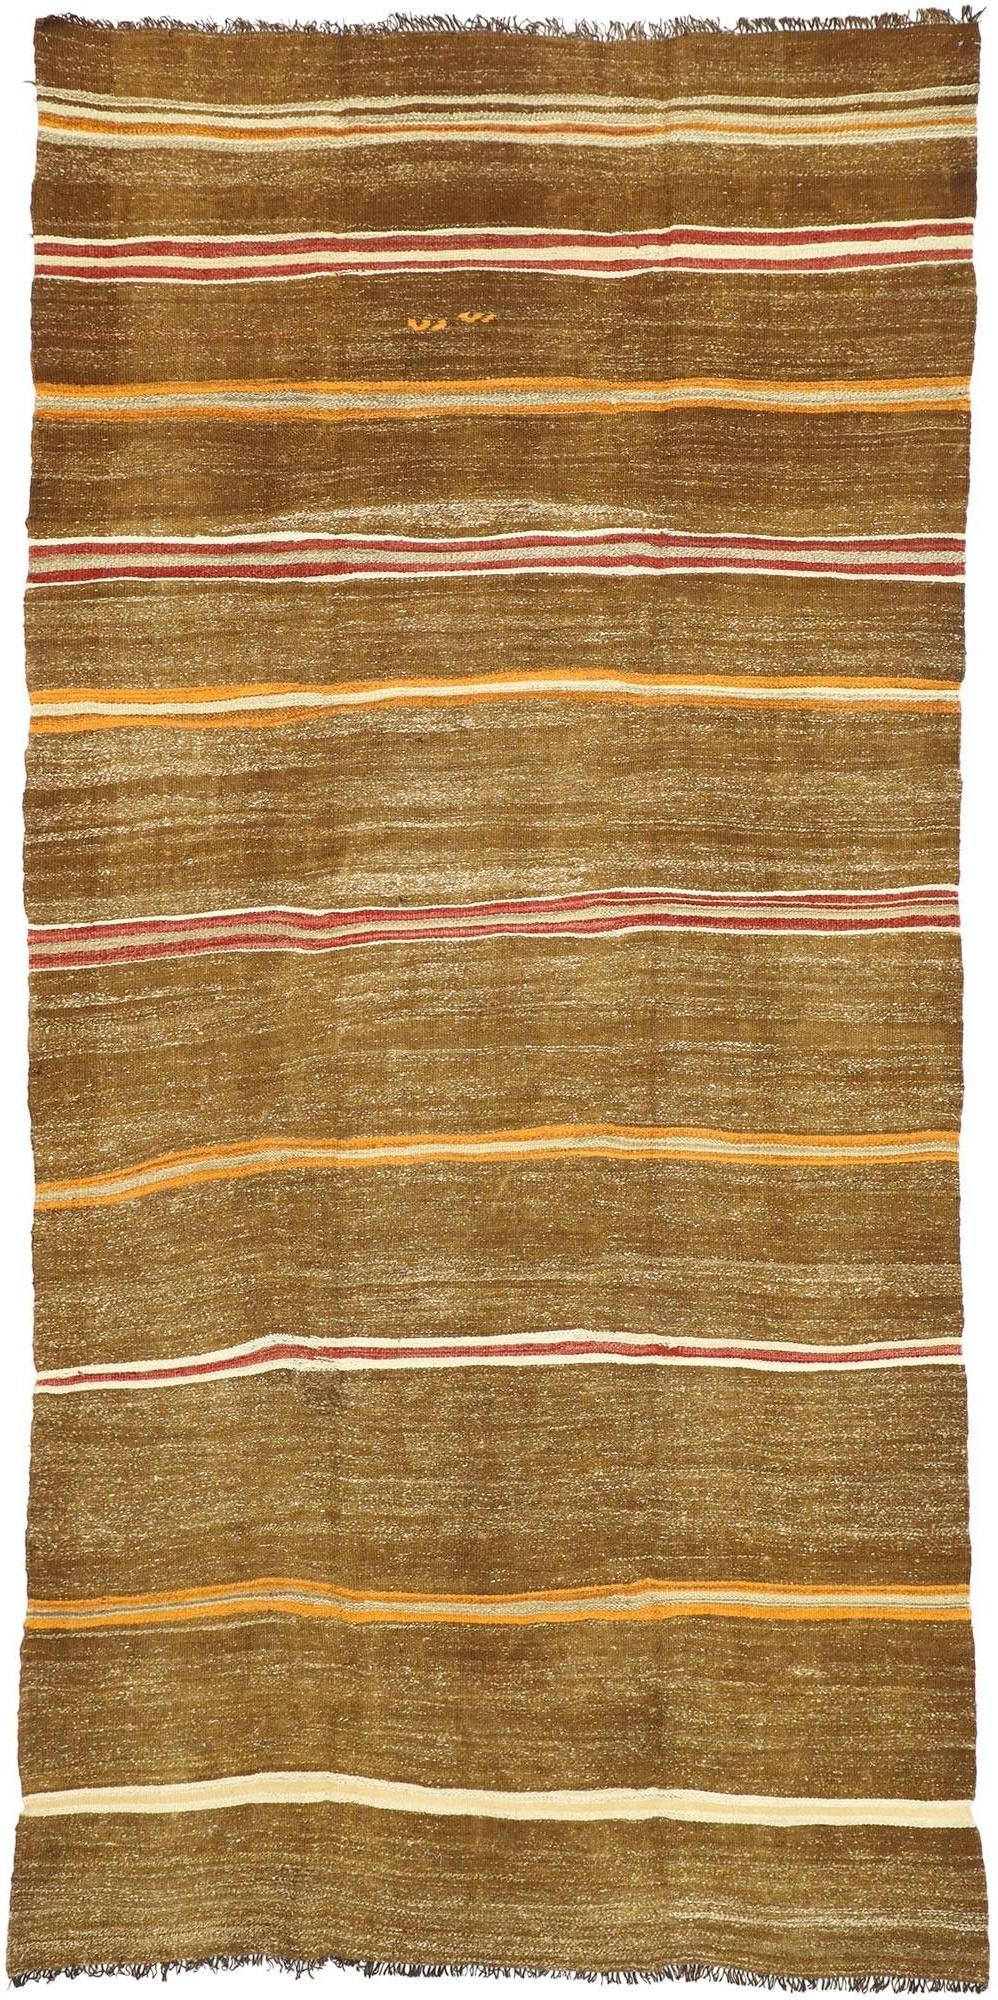 51352 vintage Turkish Kilim rug with tribal style, flat-weave rug 06'03 x 12'11. With its warm hues and rugged beauty, this hand-woven wool striped kilim runner manages to meld contemporary, modern, and traditional design elements. The flat-weave